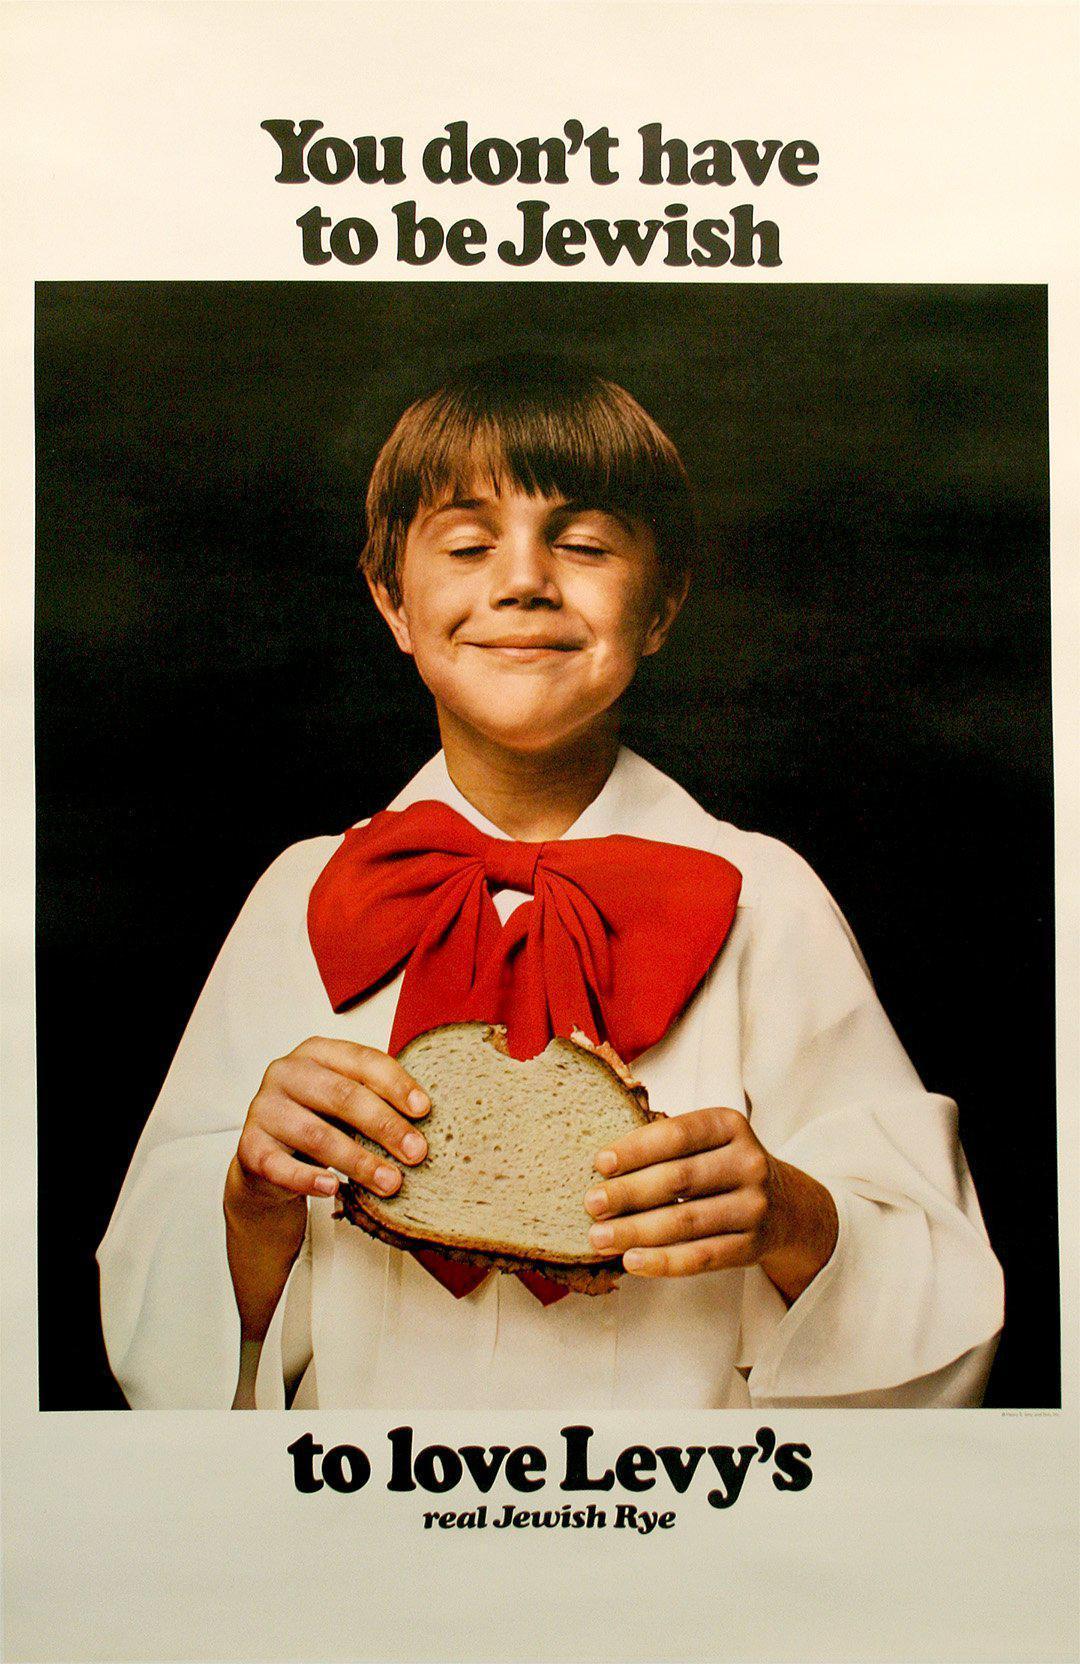 Original Vintage You Don't Have to be Jewish to Love Levy's Rye Bread Poster 1967 Choir Boy